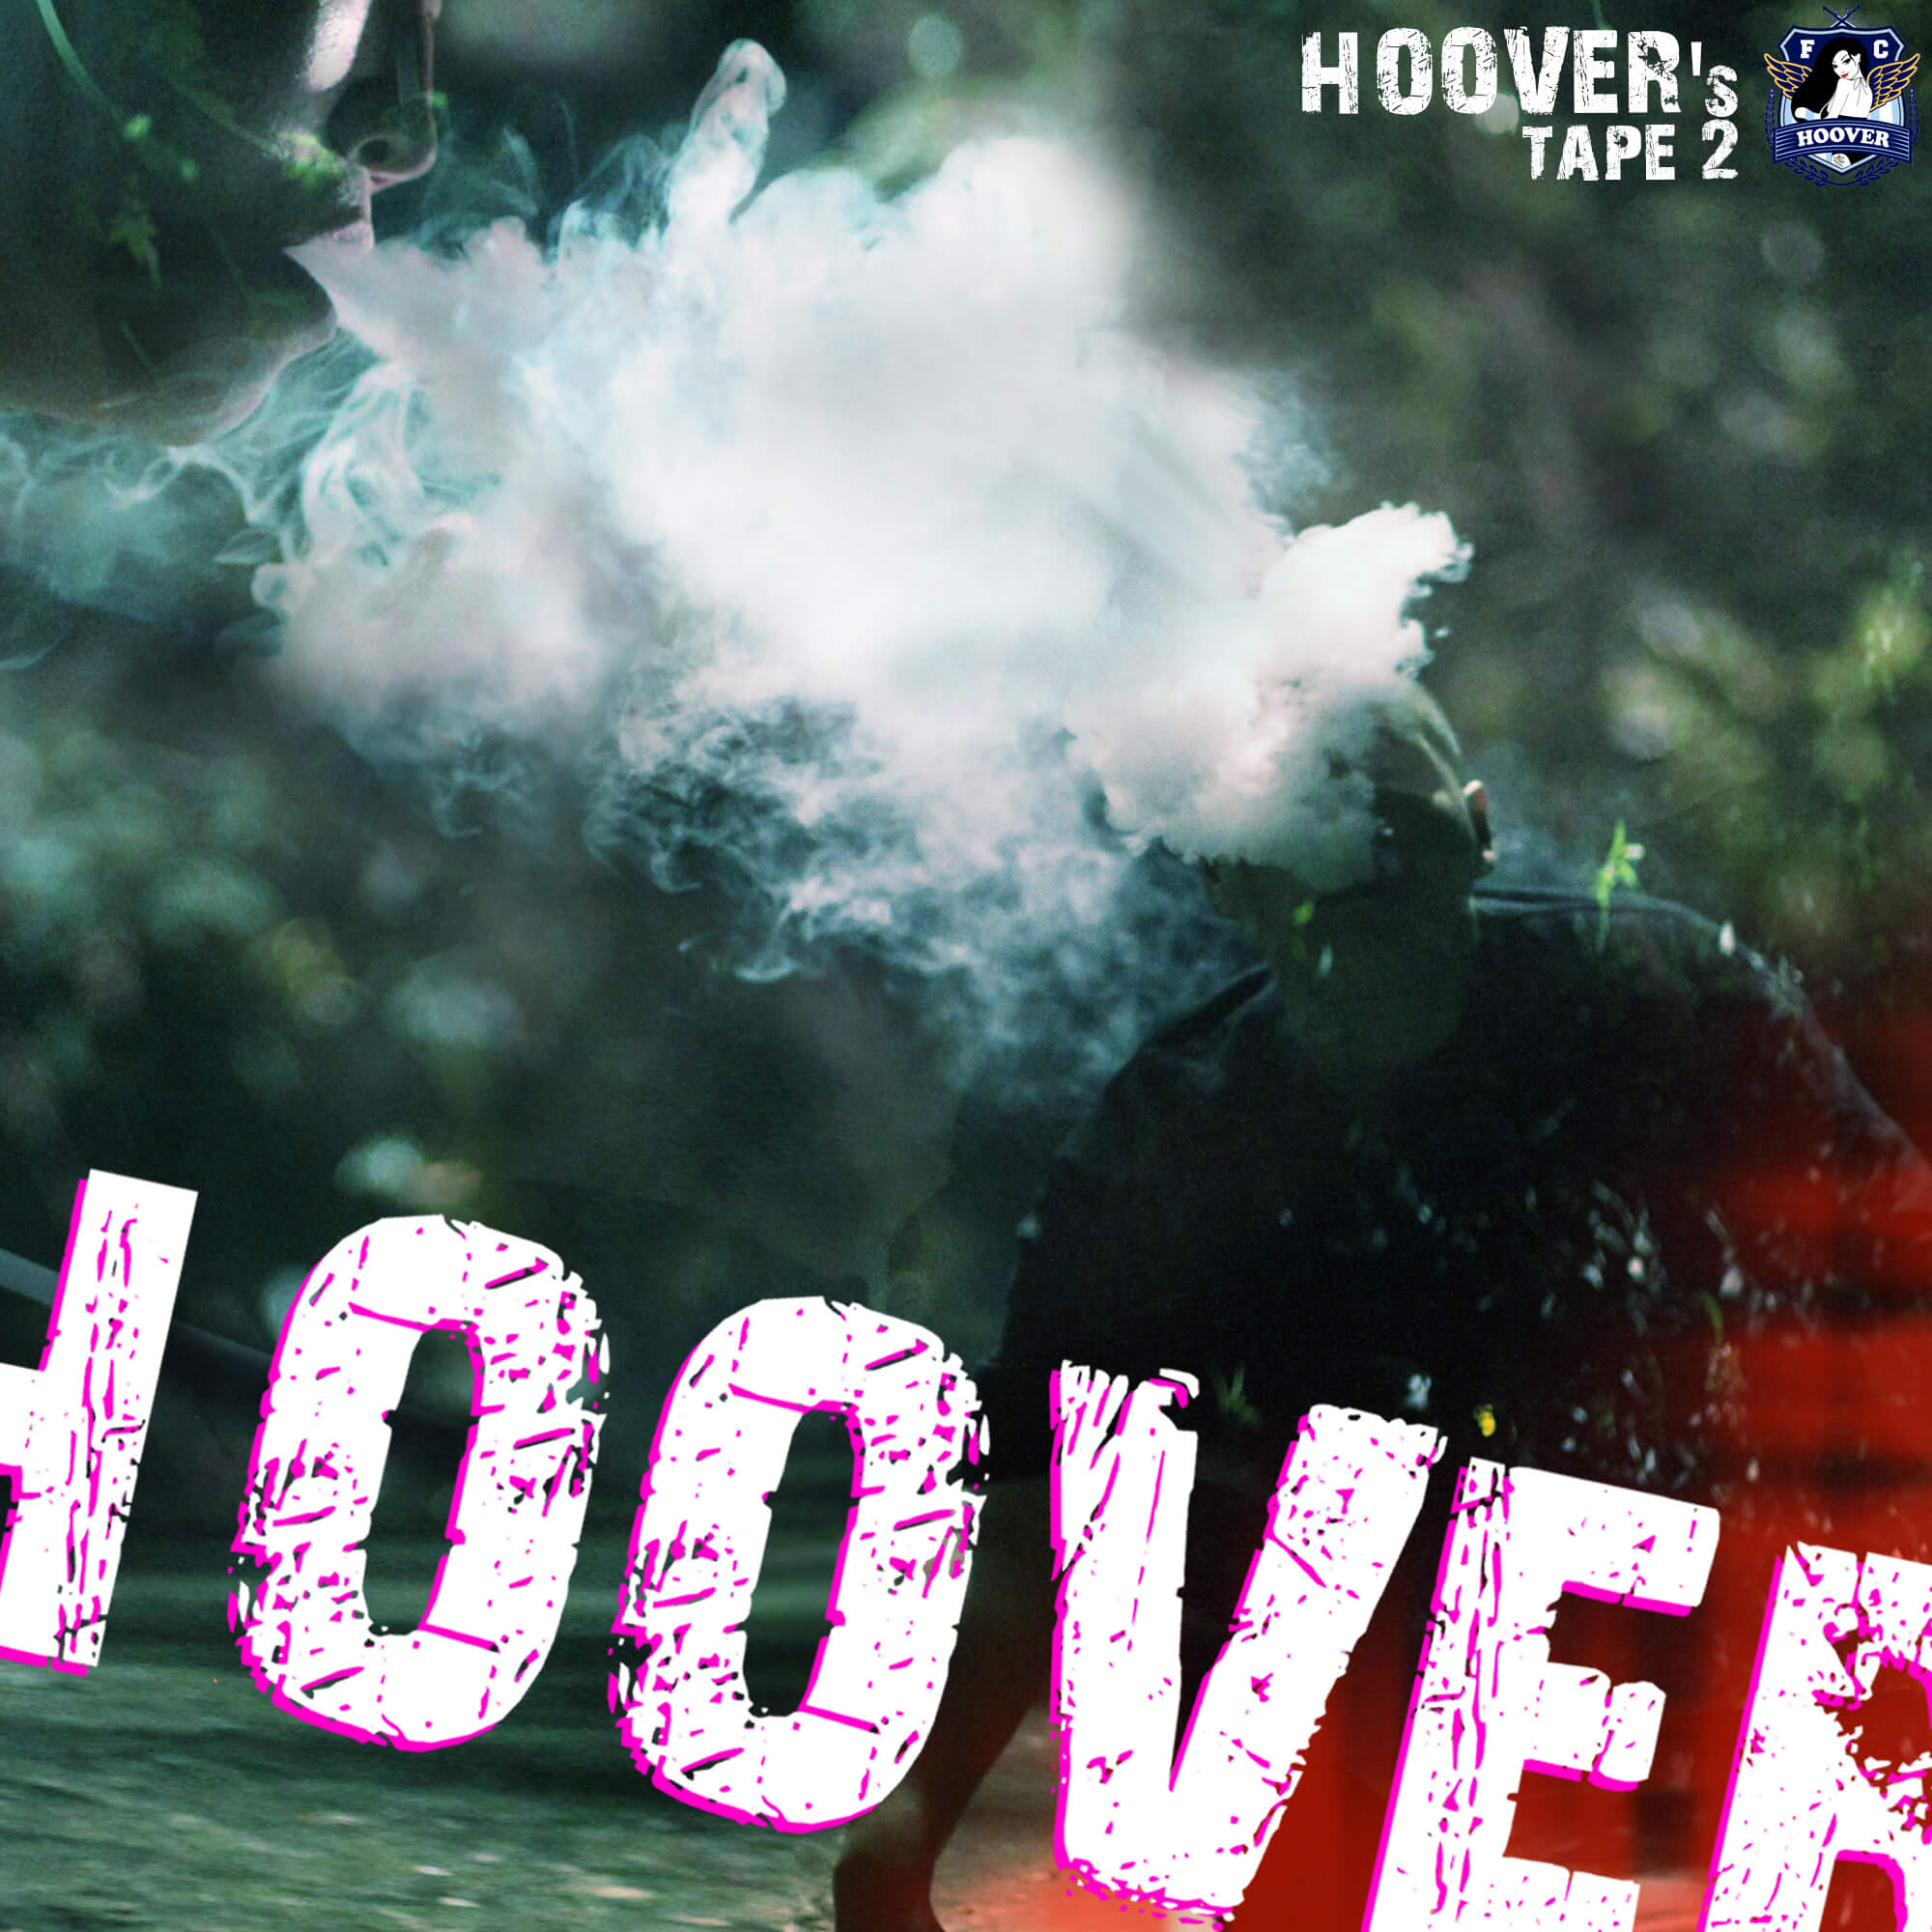 HOOVER'S TAPE 2 COVER BY 안효현 11.jpg